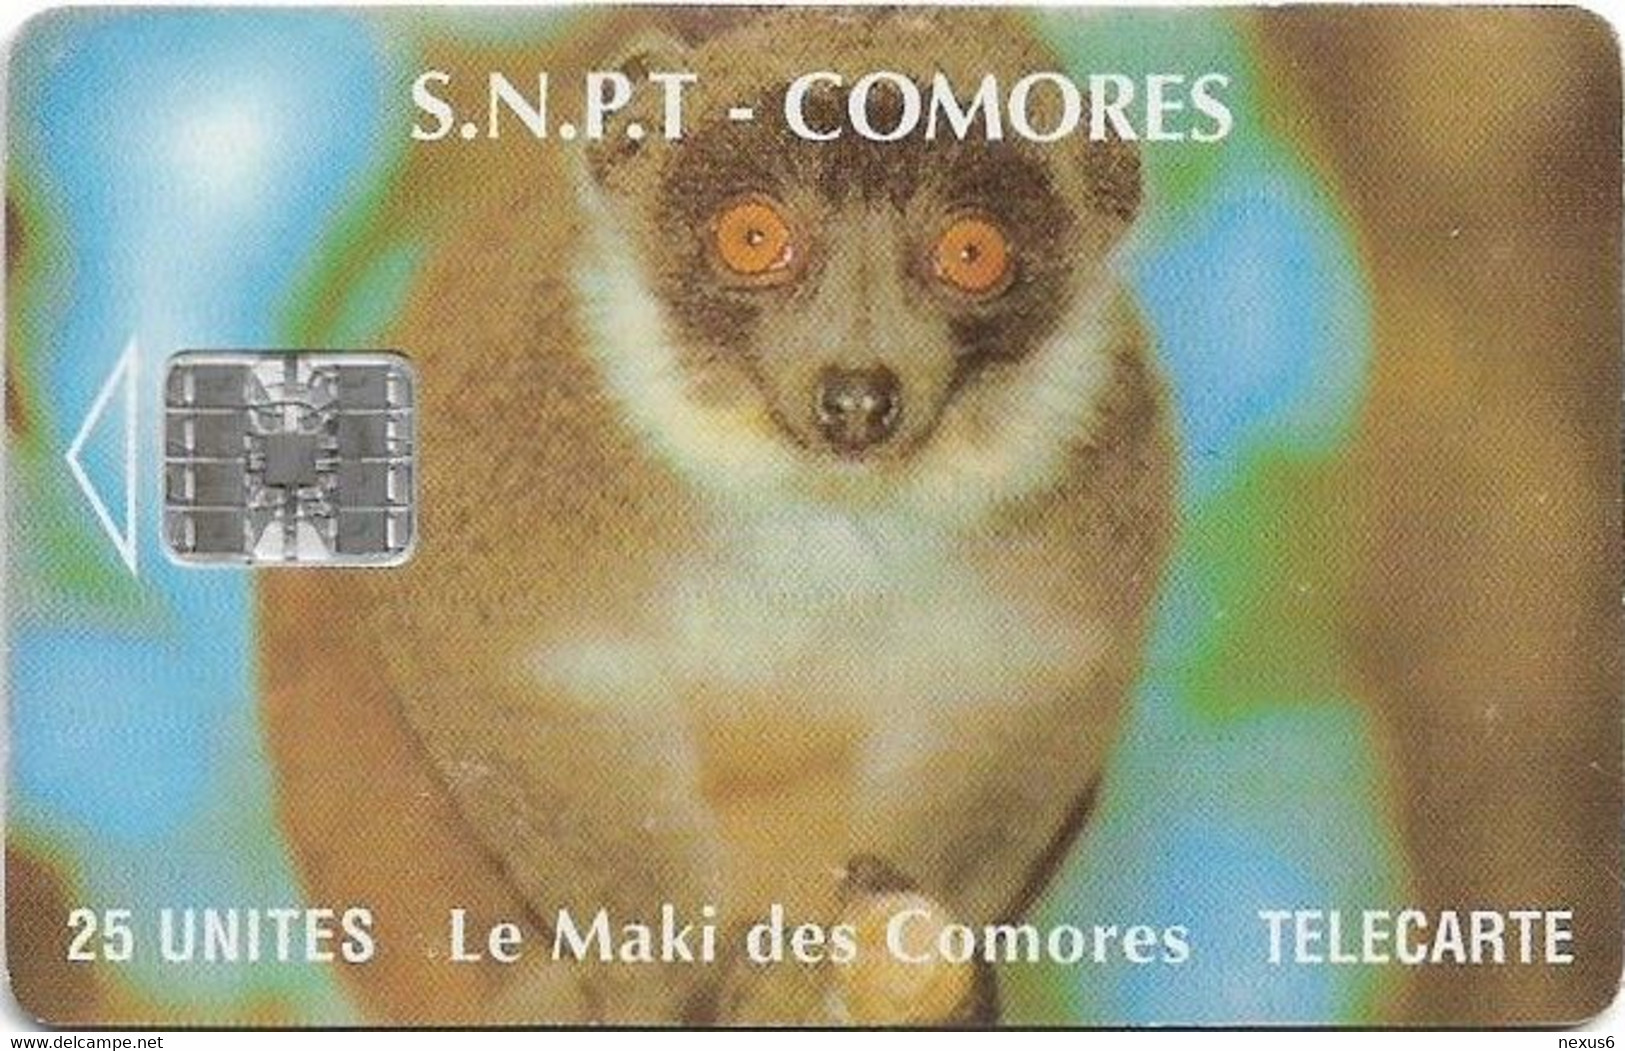 Comoros - S.N.P.T. - Maki, Without Moreno Up Right, Without Cn., SC7, 1994, 25Units, Used - Komoren